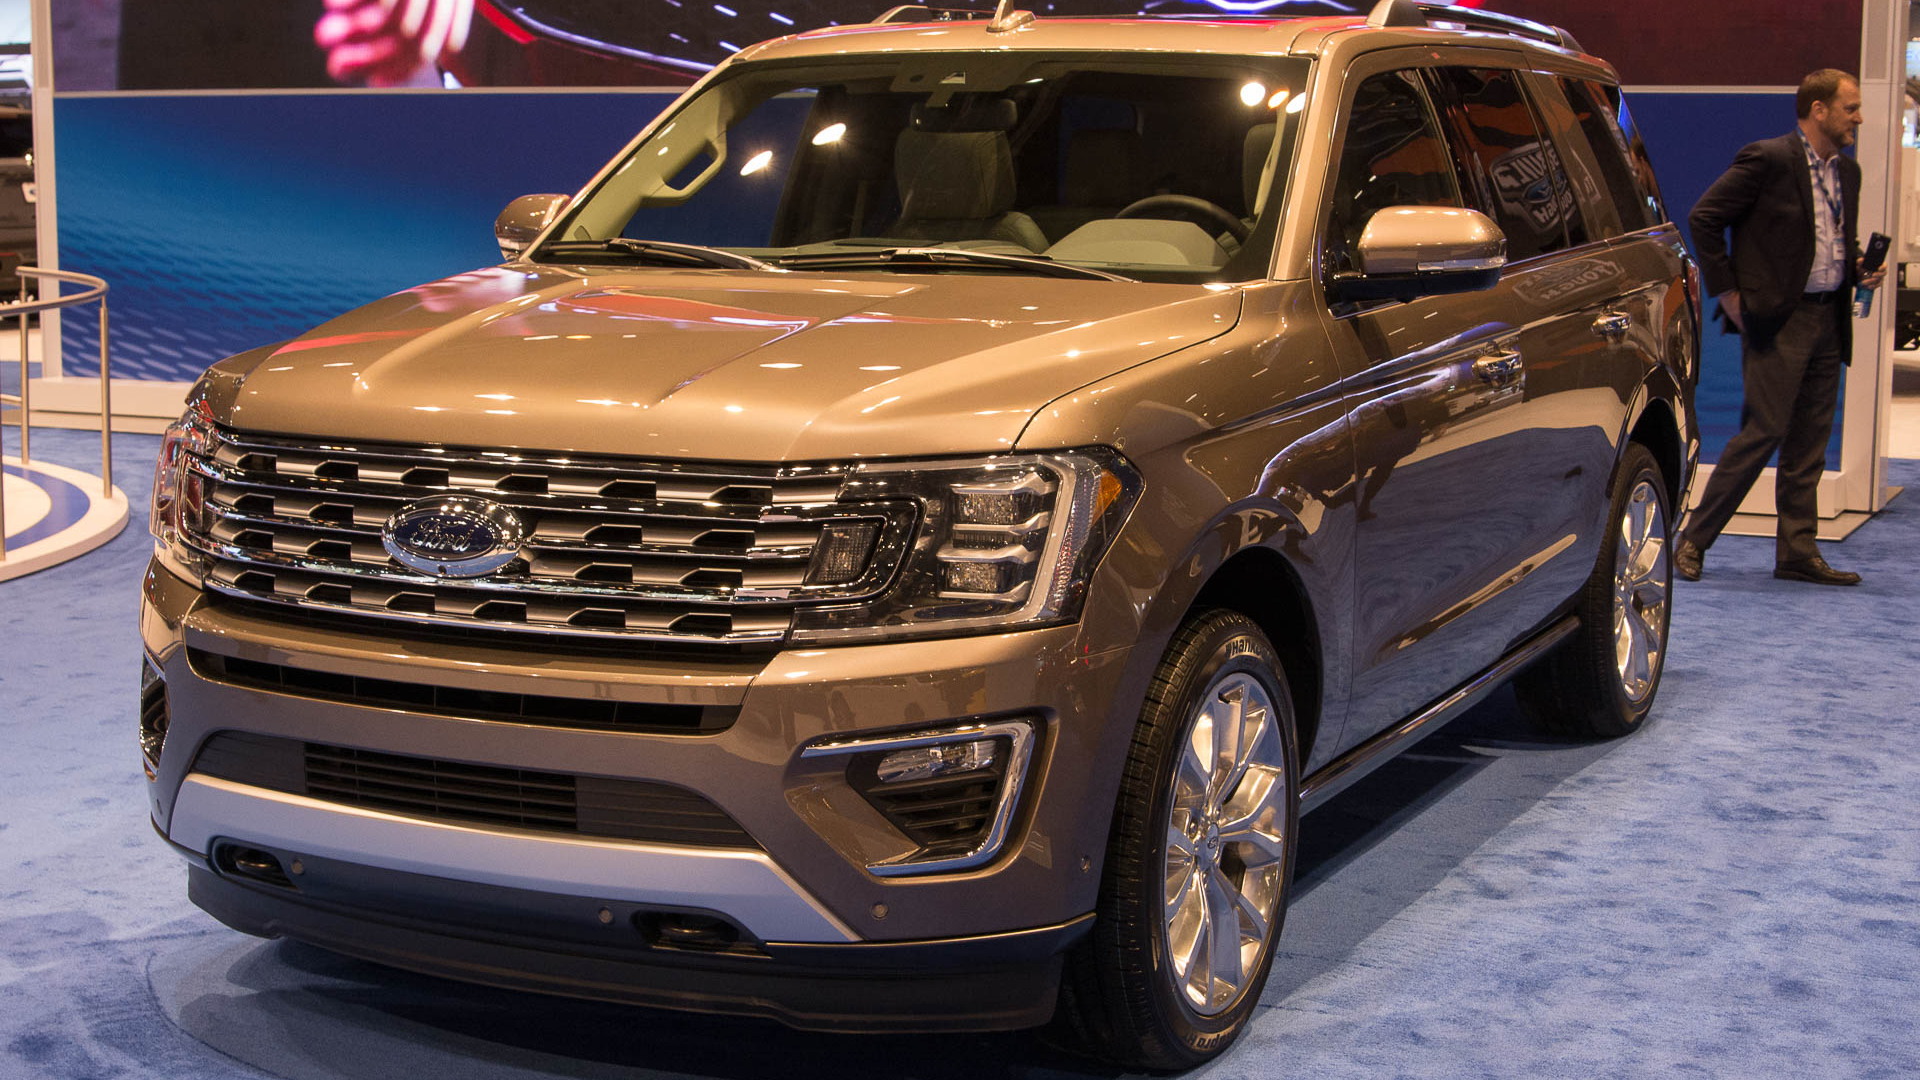 2018 Ford Expedition, 2017 Chicago auto show